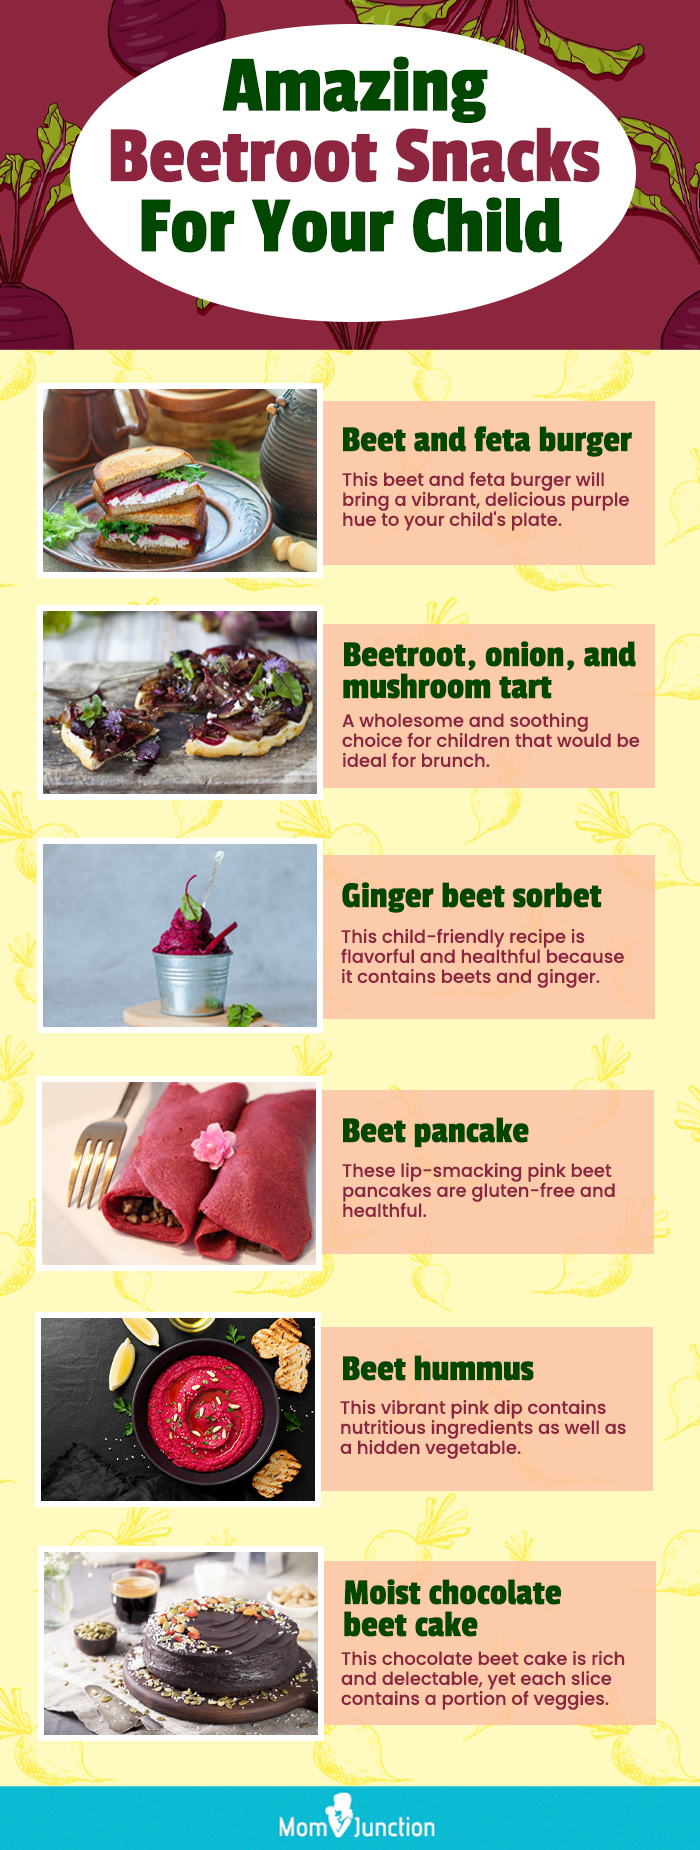 amazing beetroot snacks for your child (infographic)